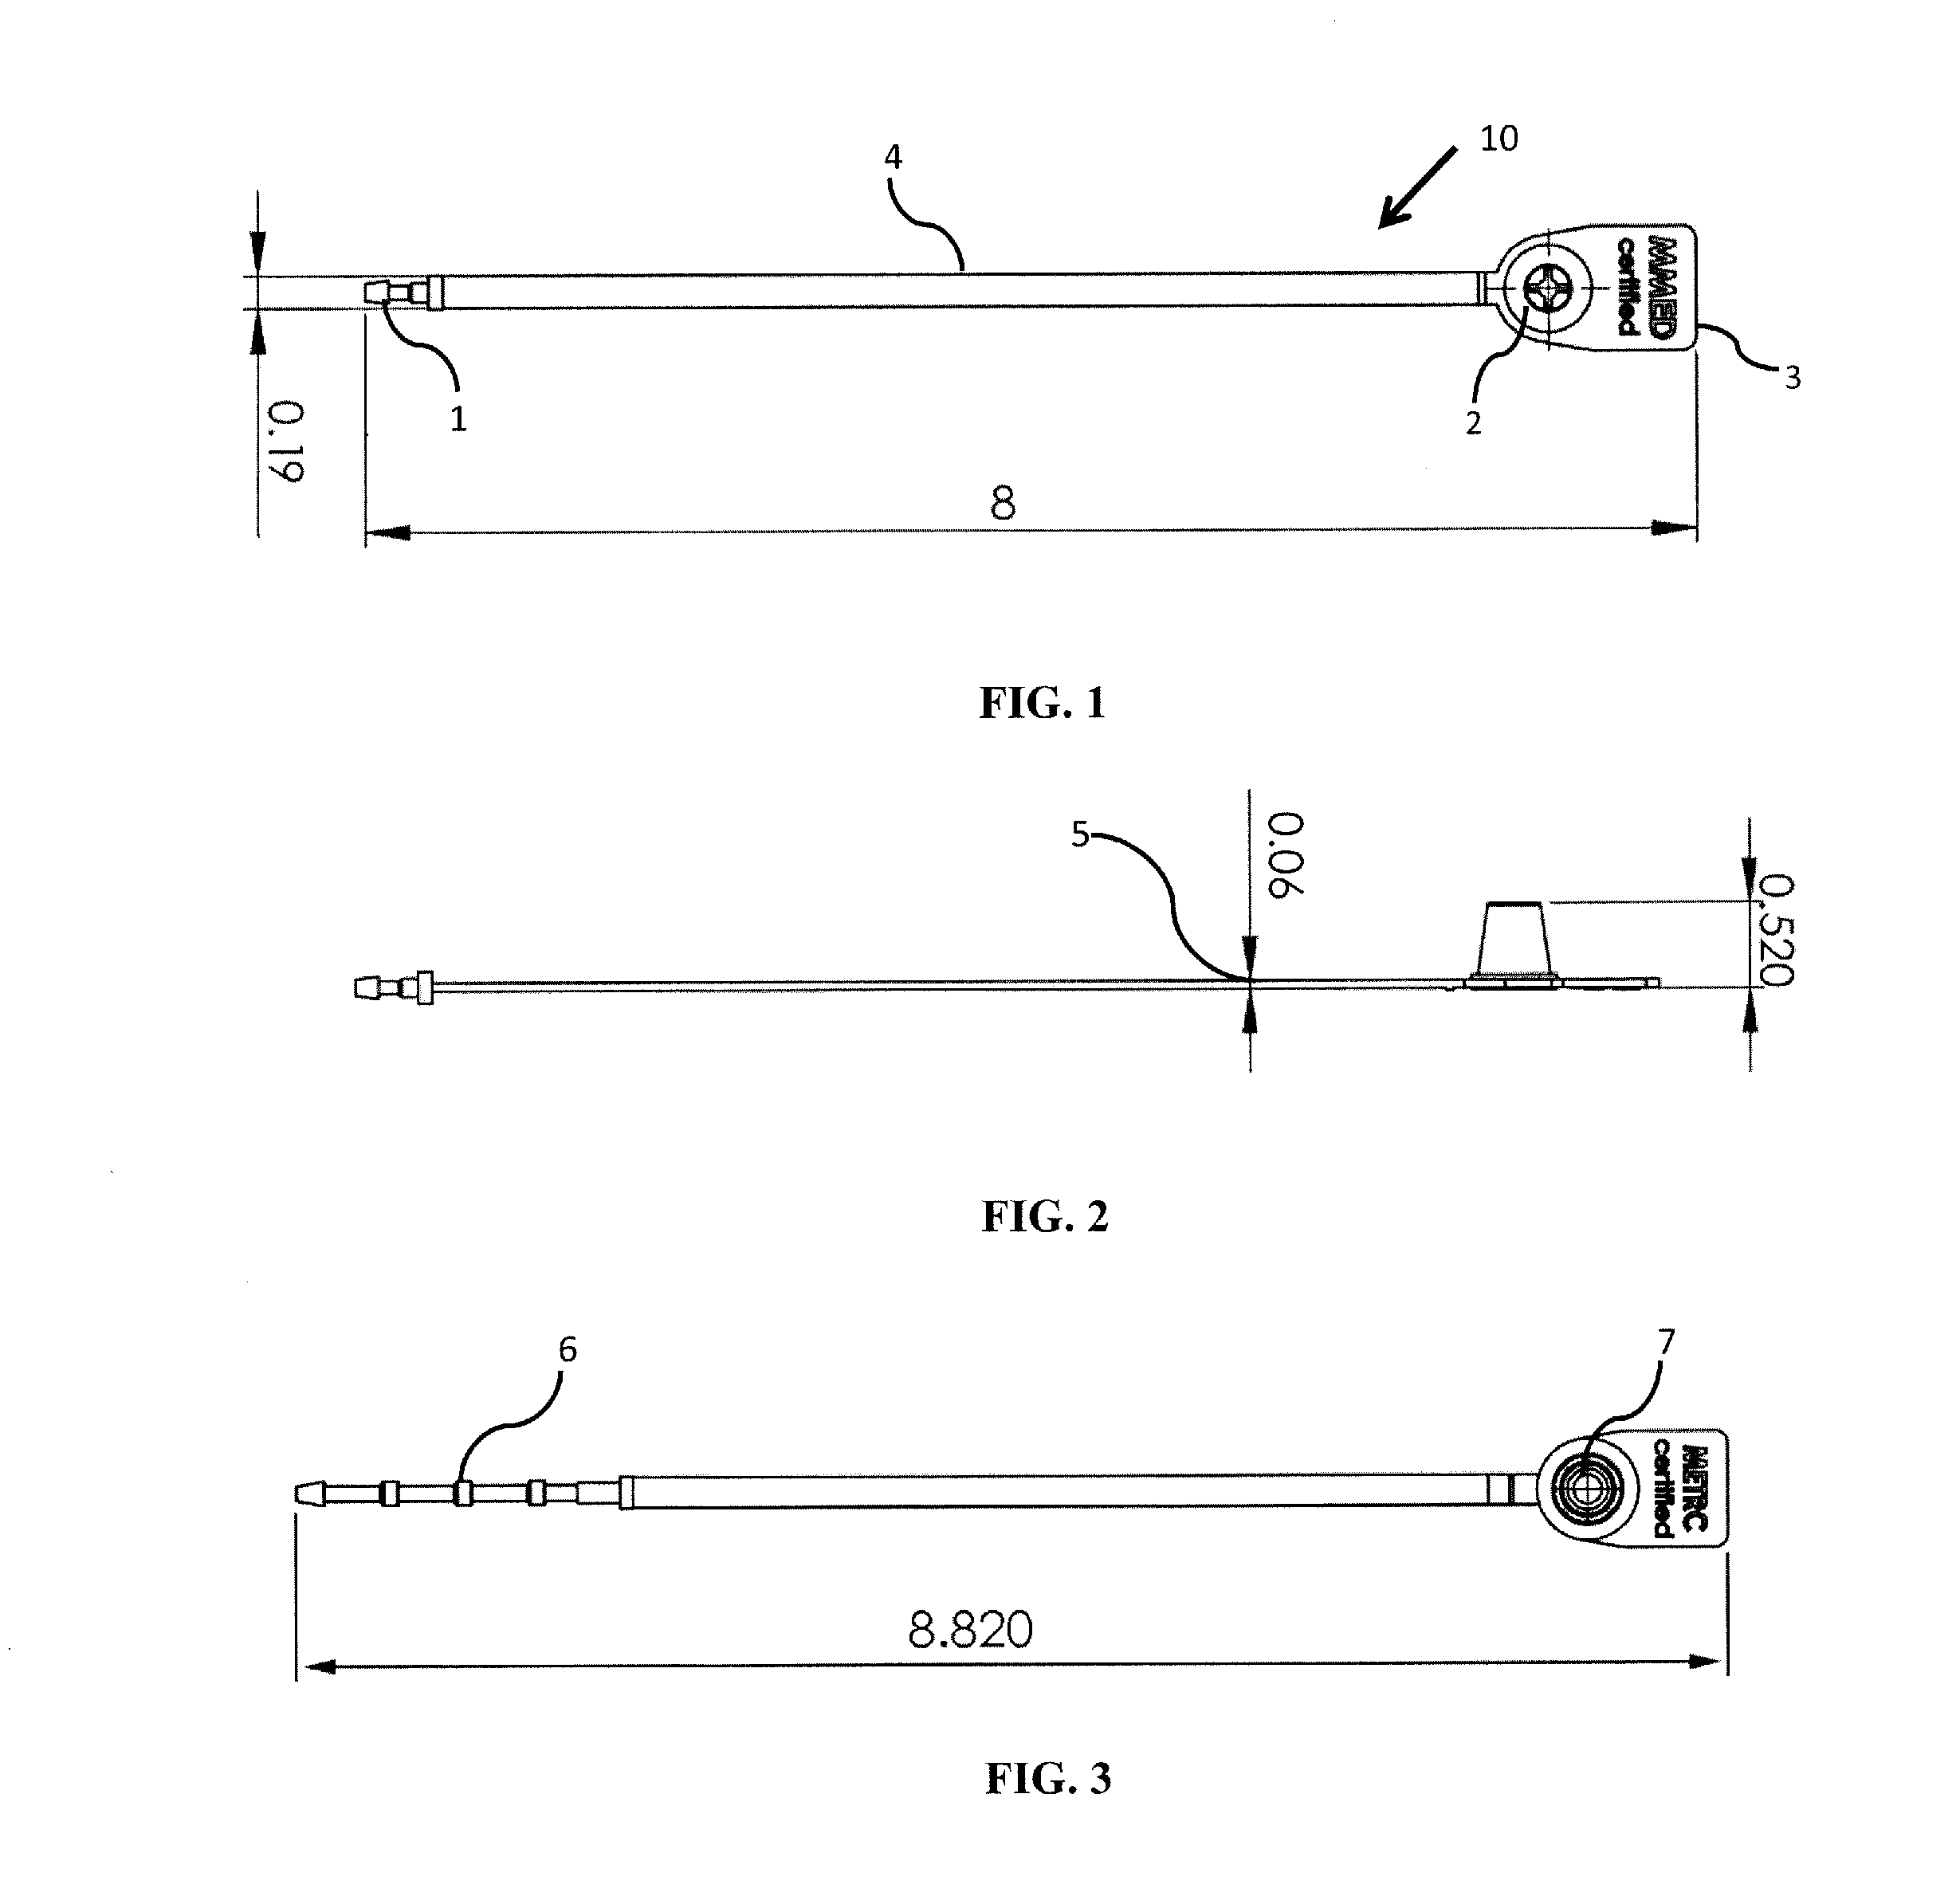 Method and apparatus for tracking one or more plants and/or  plant based products and/or tracking the sale of products derived from the same, utilizing RFID technology